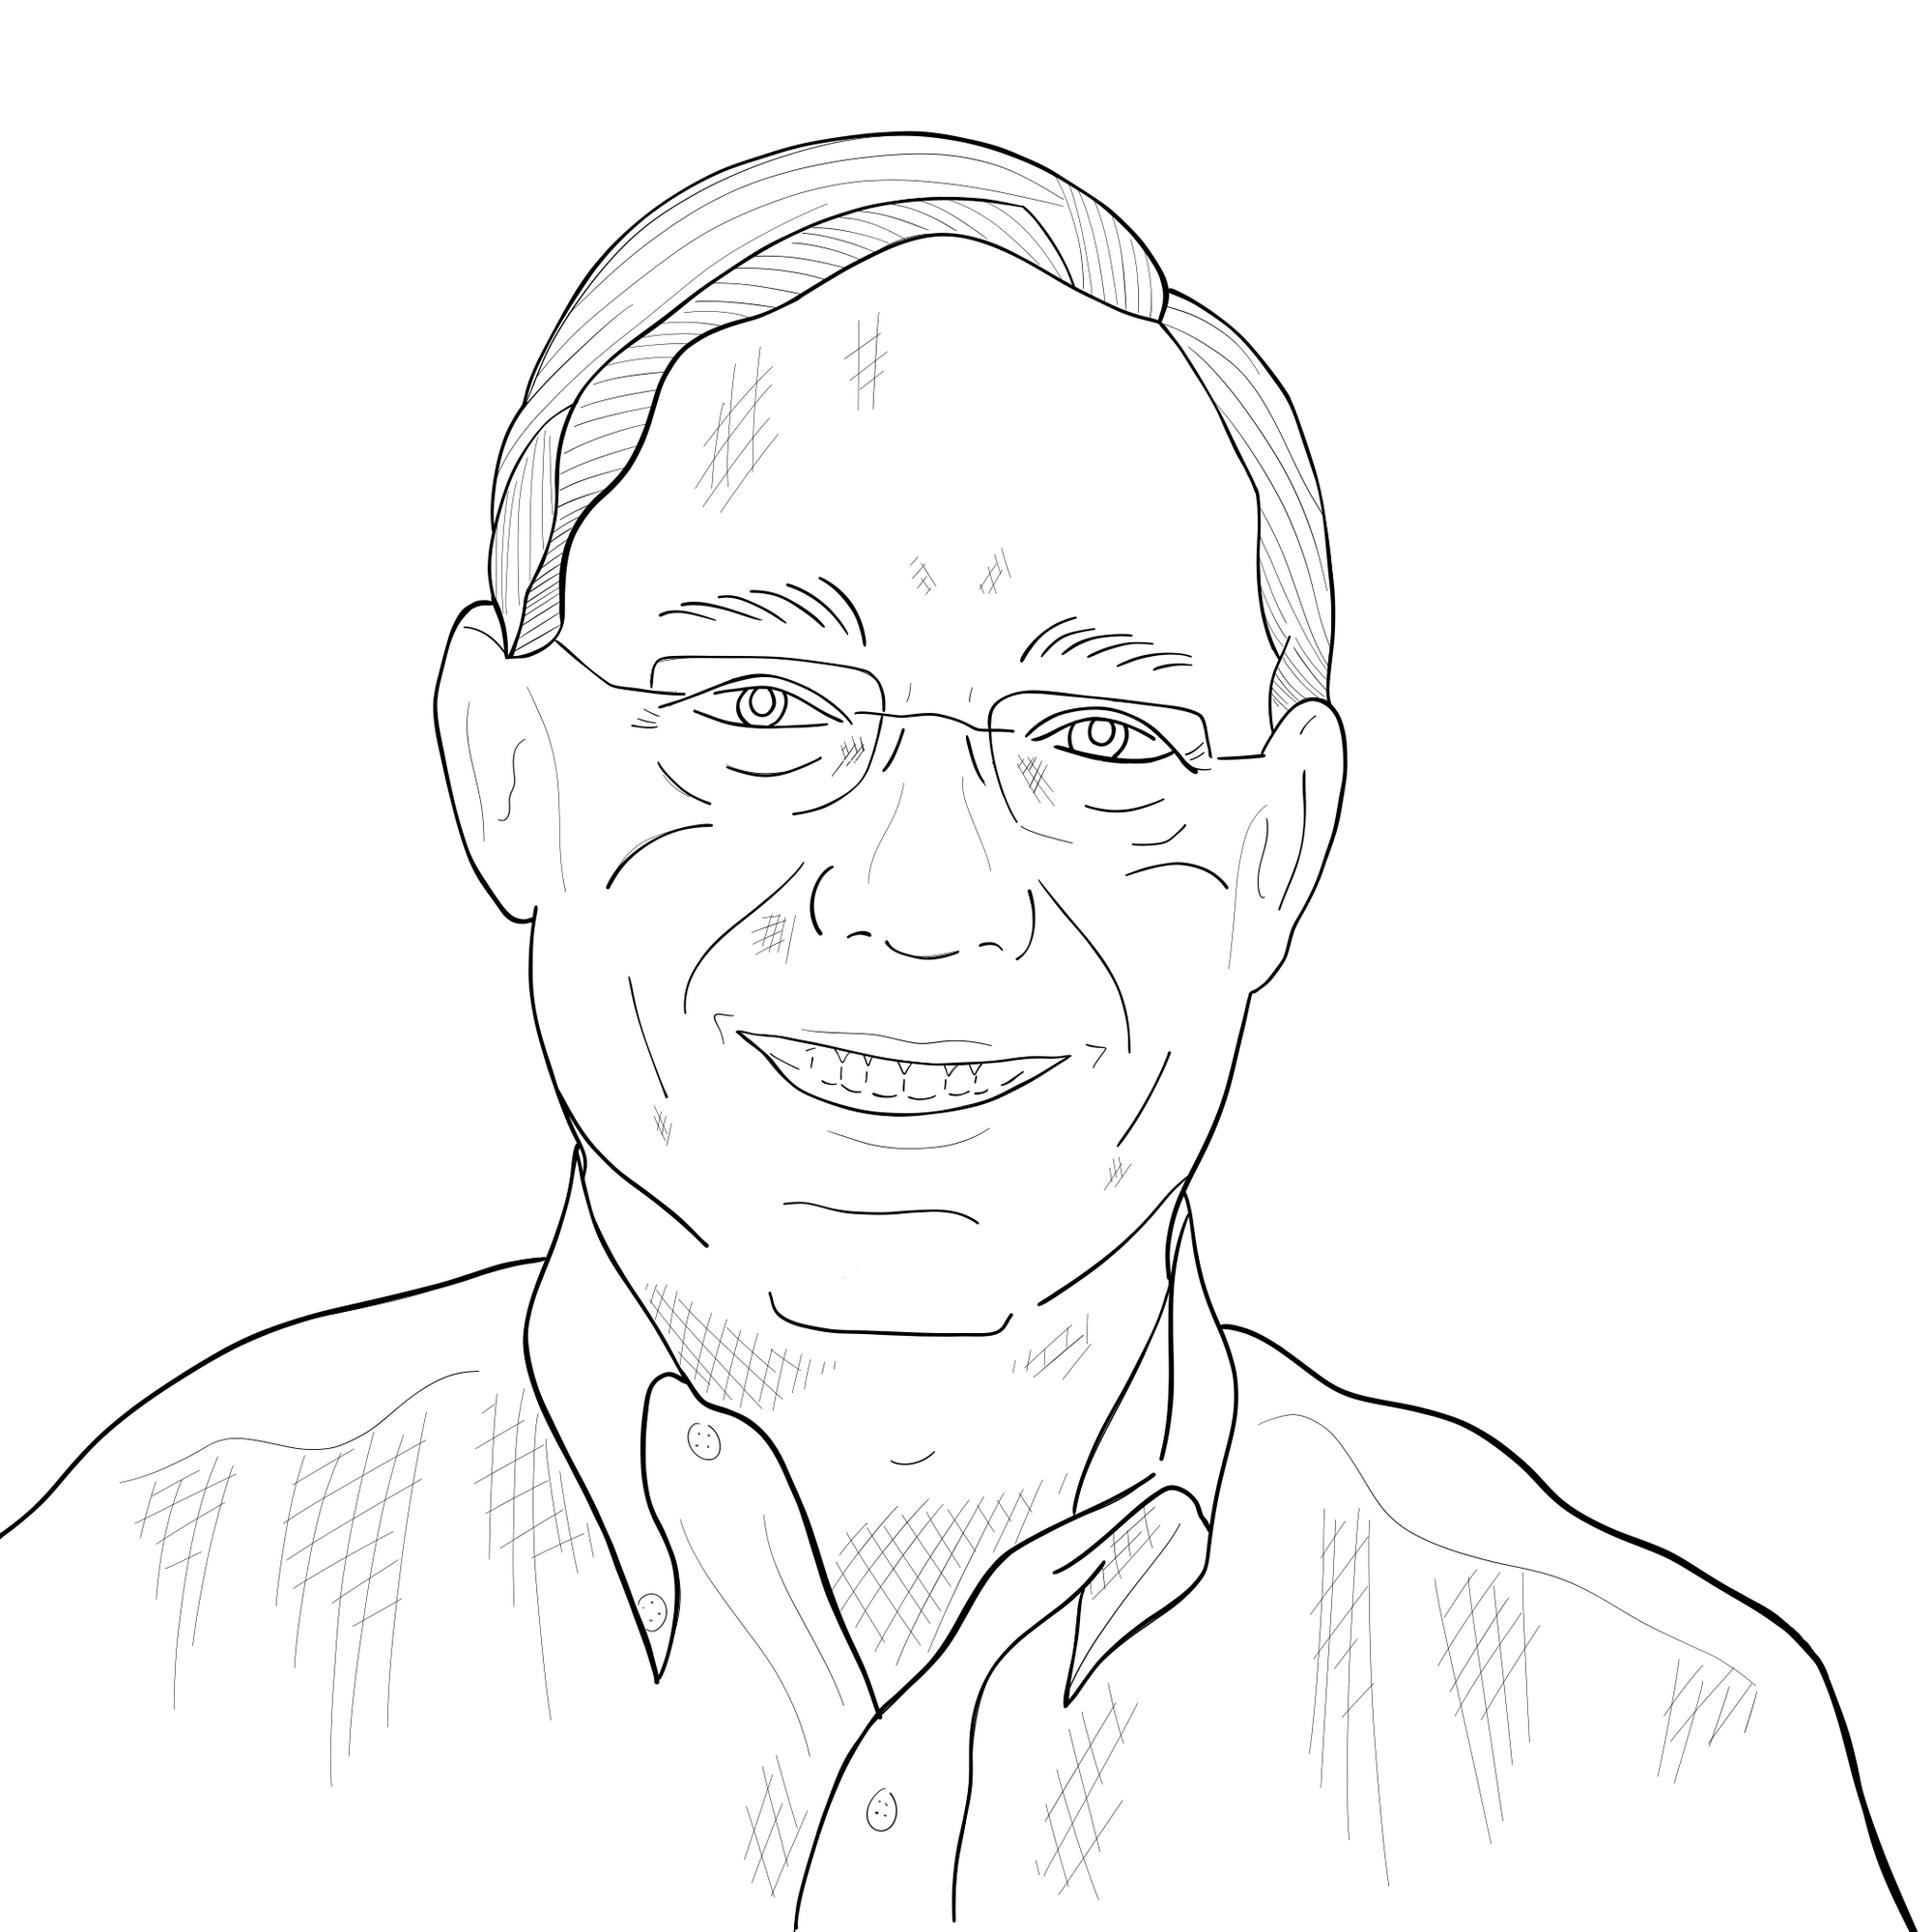 Line drawing of Dan Pitt. A portrait of a man smiling with glasses.